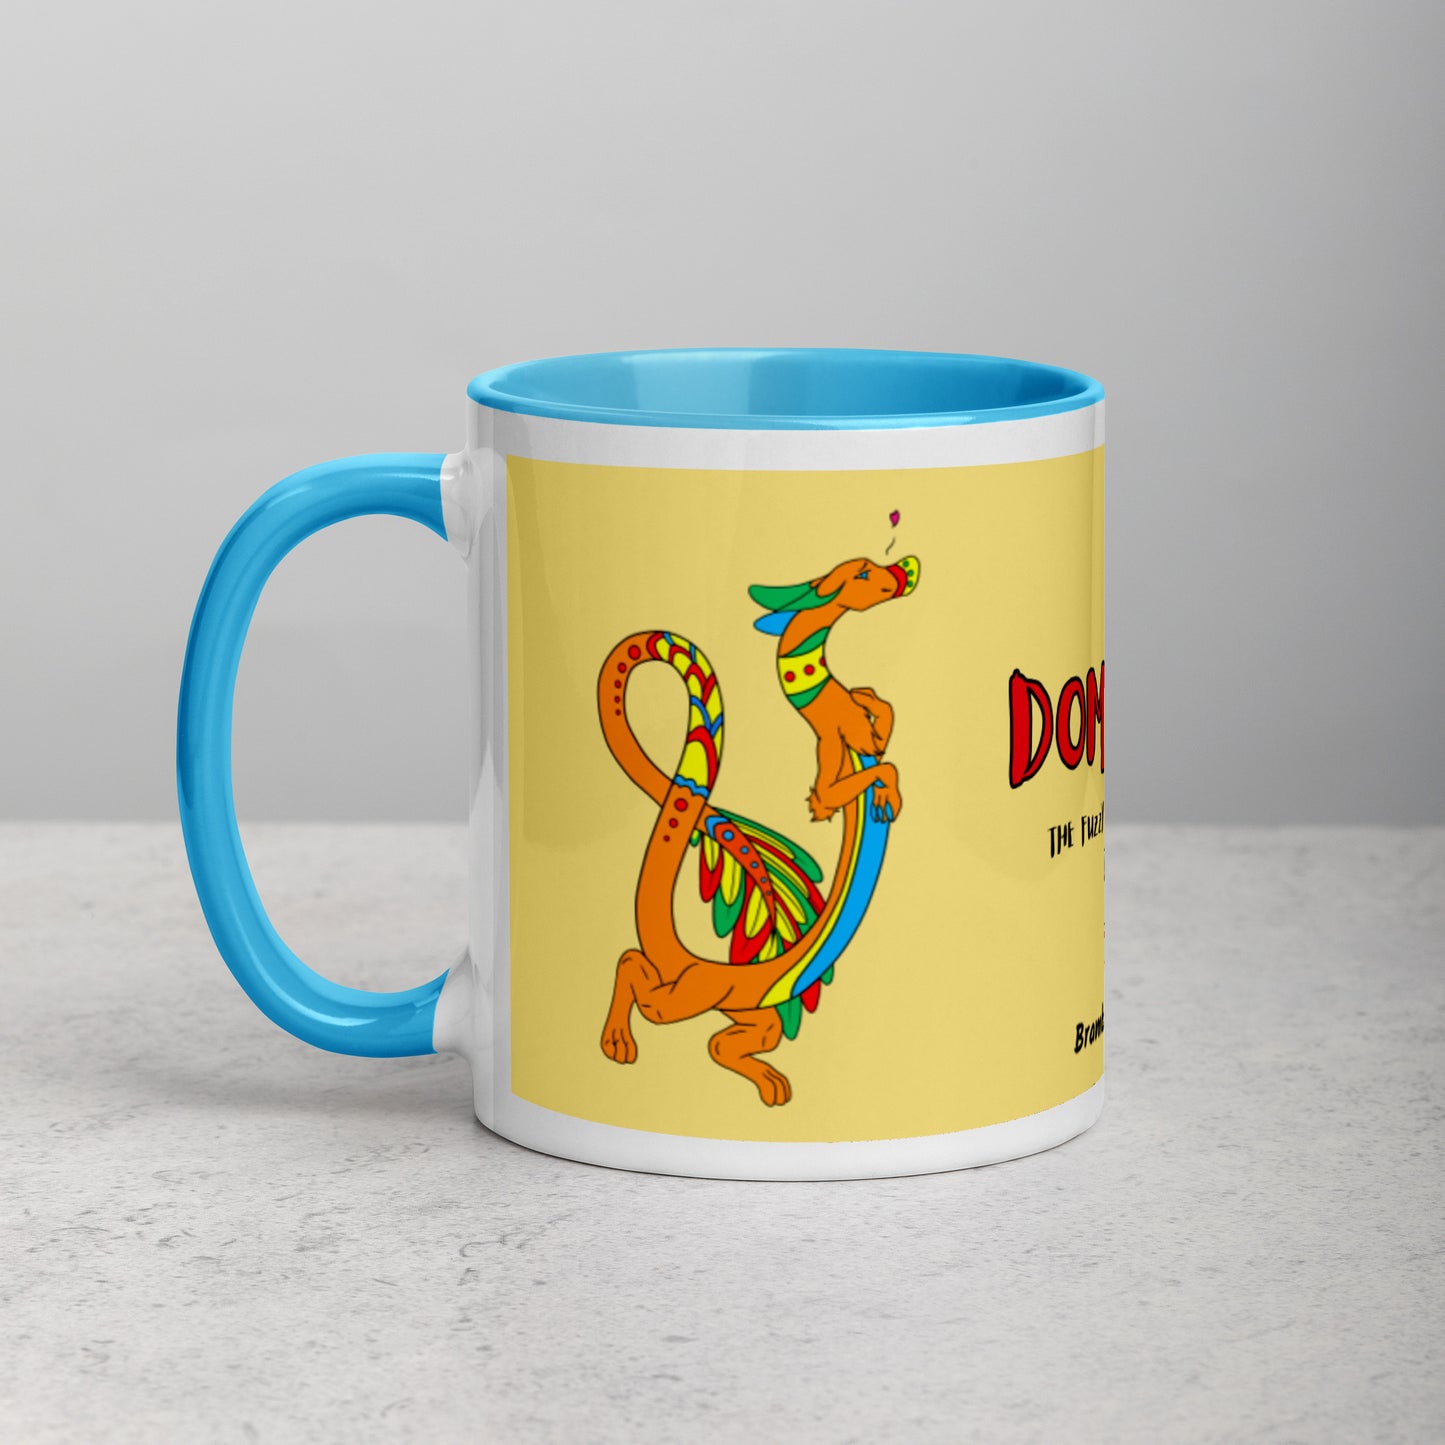 11 ounce white ceramic mug featuring a double-sided image of Domingo the Fuzzy Noodle Dragon against a light yellow background. Blue inside and handle color. Shown on tabletop.